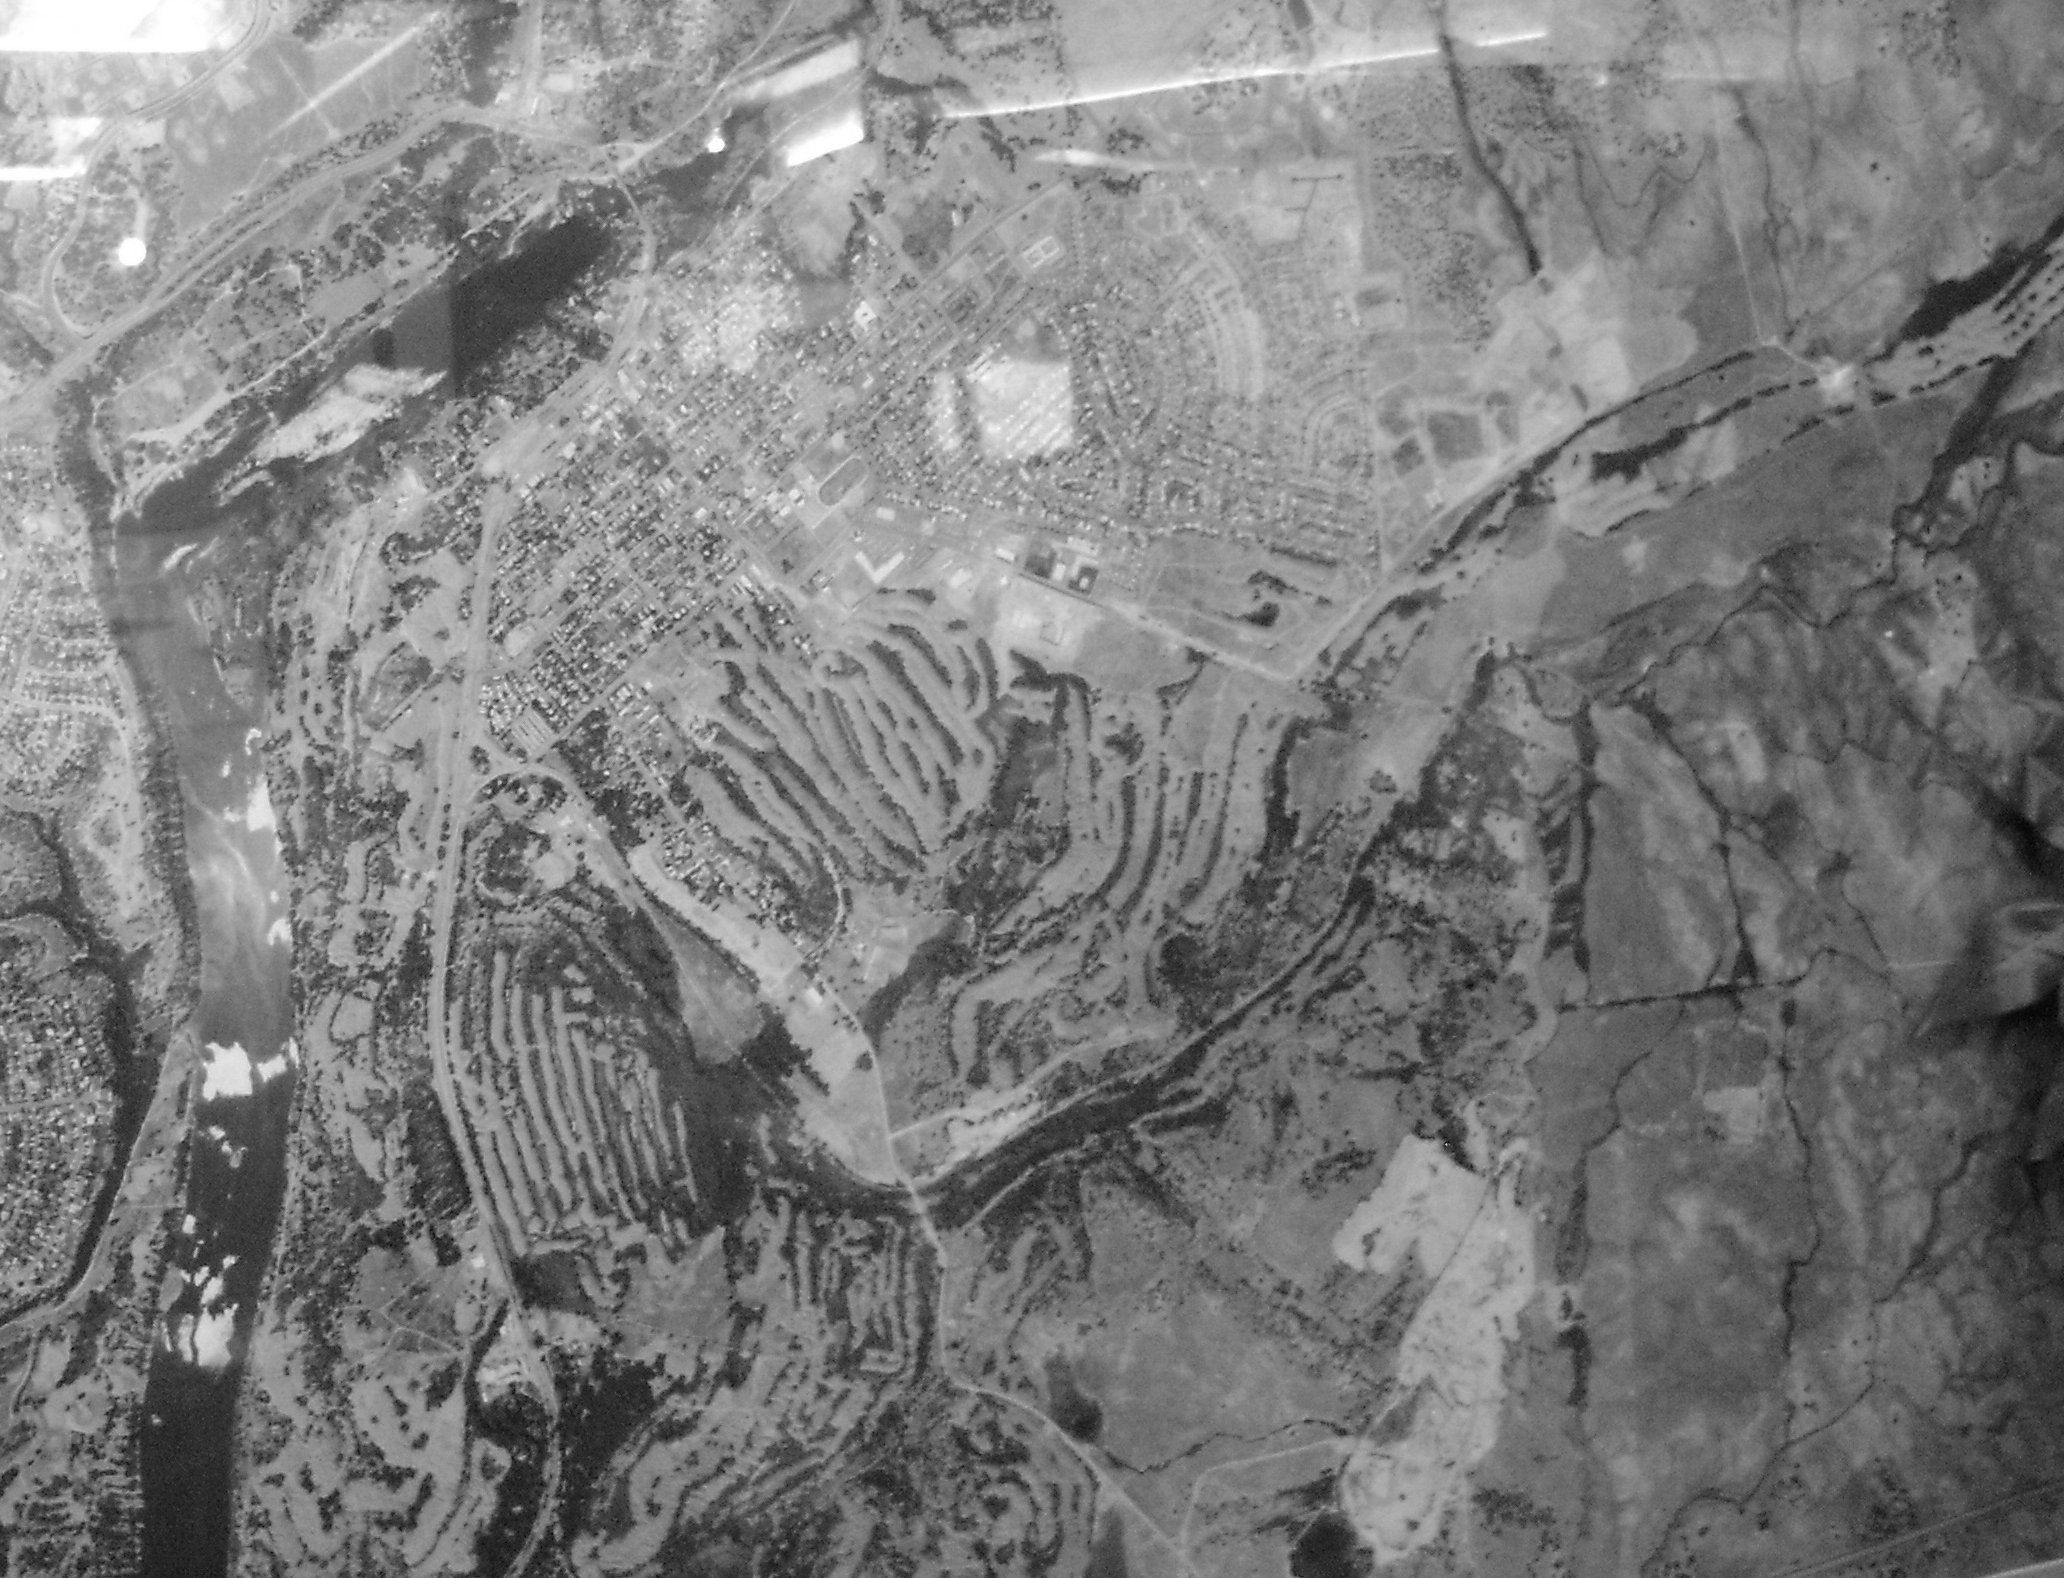 Tailings - Aerial map of tailings in early Folsom